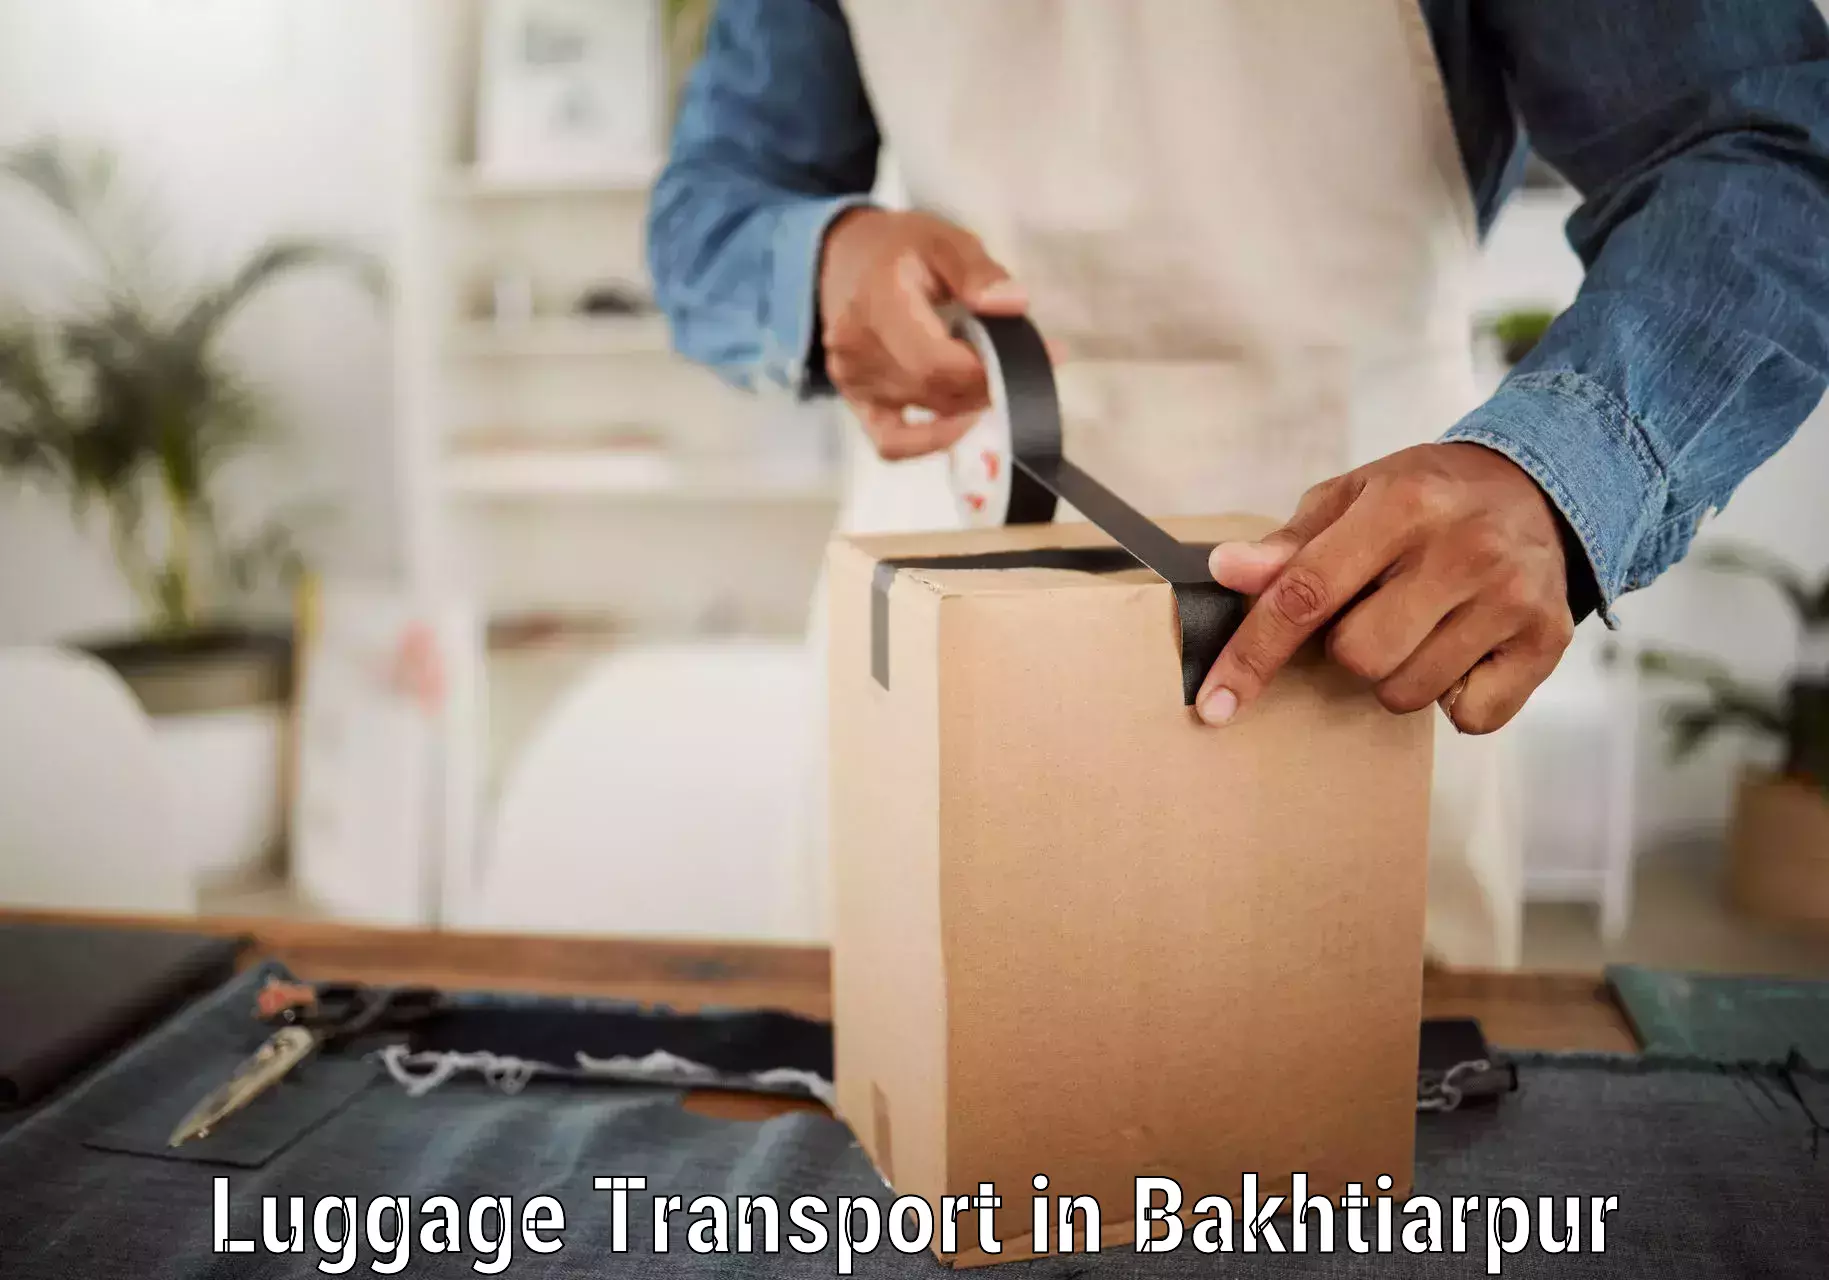 Luggage shipping trends in Bakhtiarpur